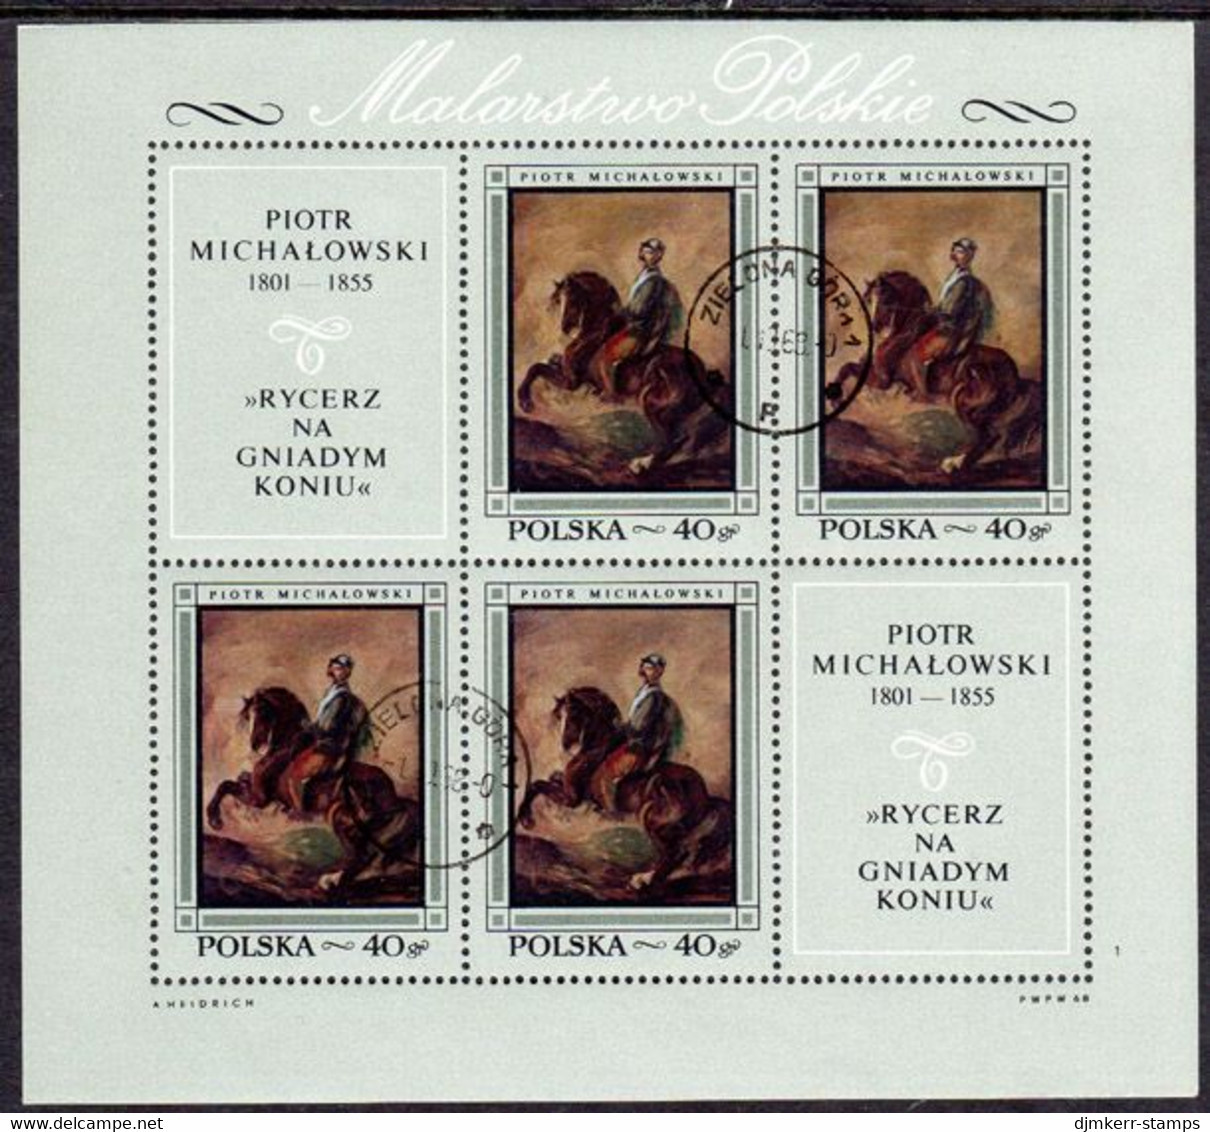 POLAND 1968 Polish Paintings I Sheetlets Used.  Michel 1864-71 Kb - Used Stamps